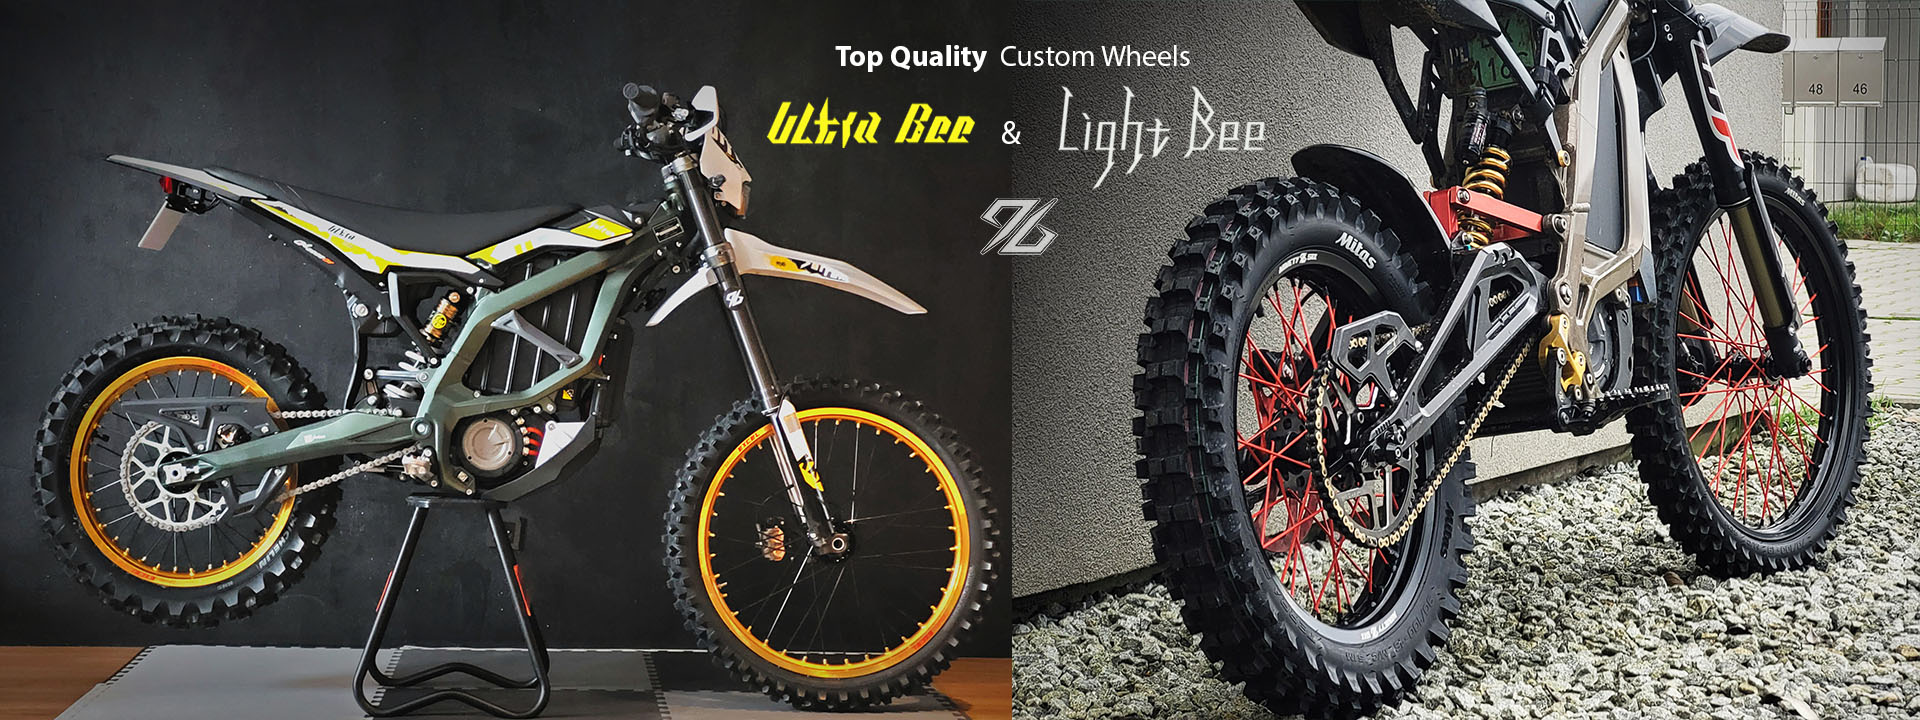 96 Power Parts, the ultimate Sur-Ron Light Bee tuning parts store